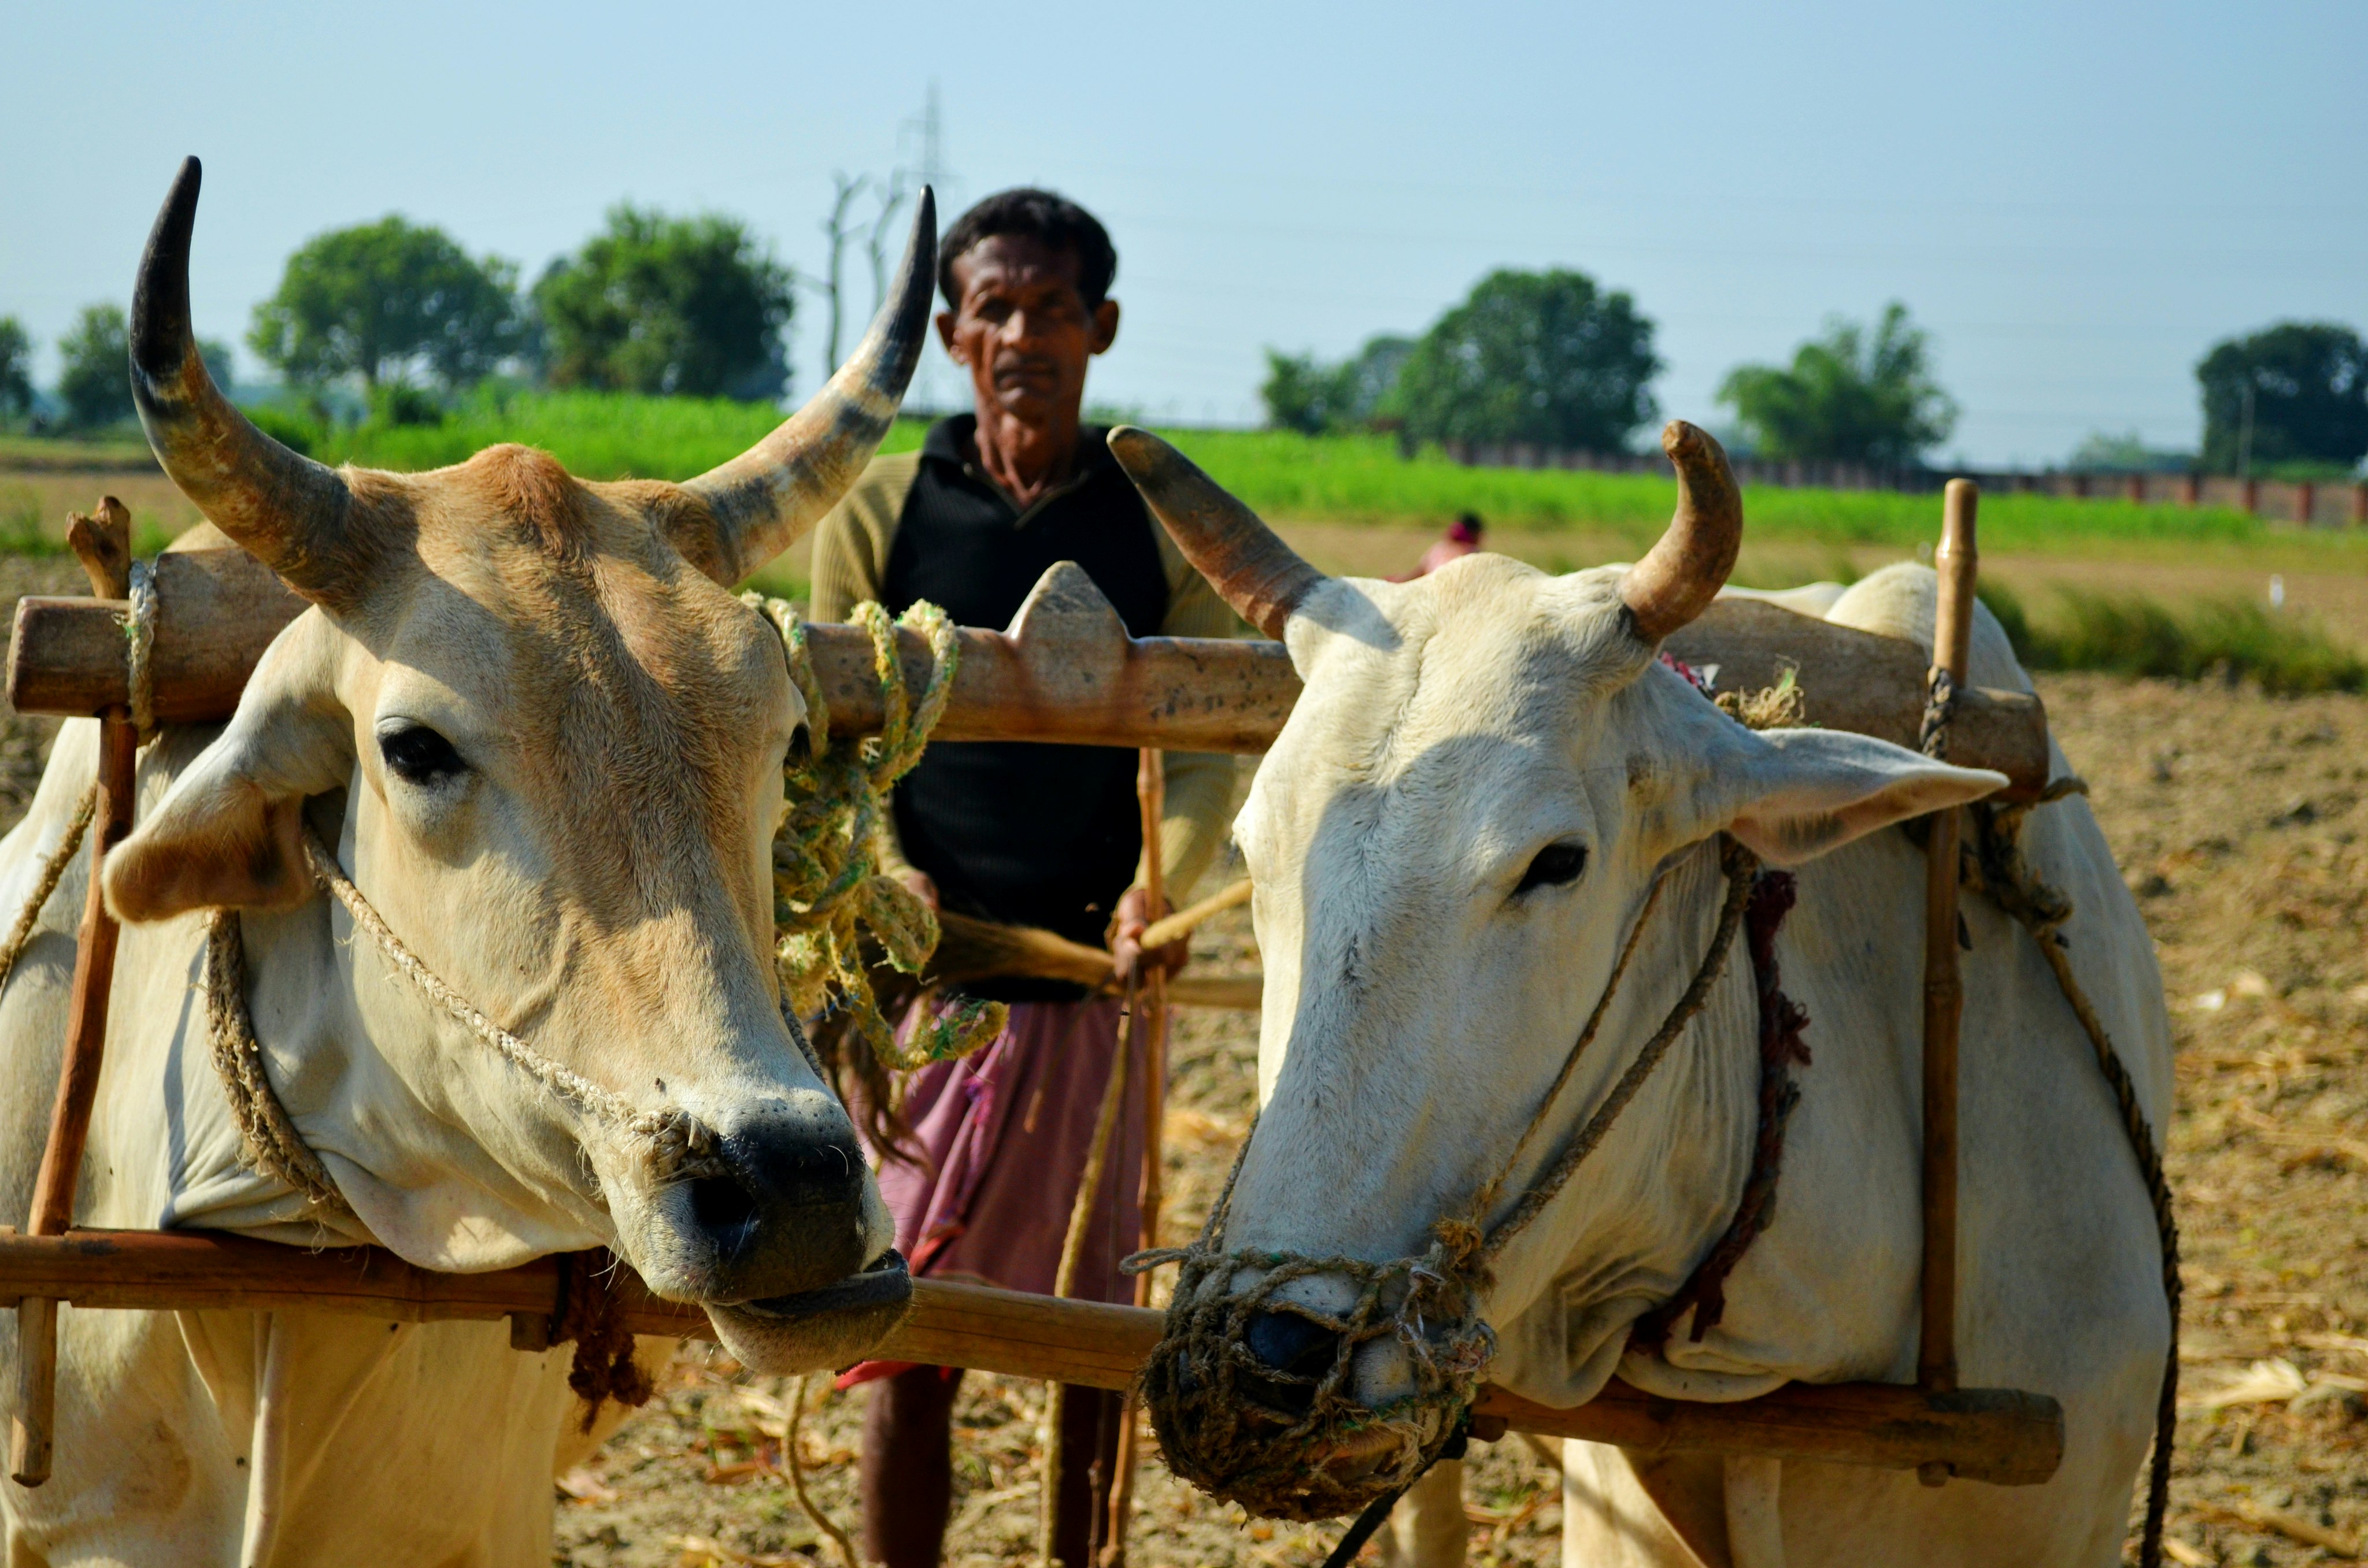 The most underrated and for granted occupation. A couple of Oxen and a excited farmer posing to get clicked while working on the fields ultimately to put food on our table.